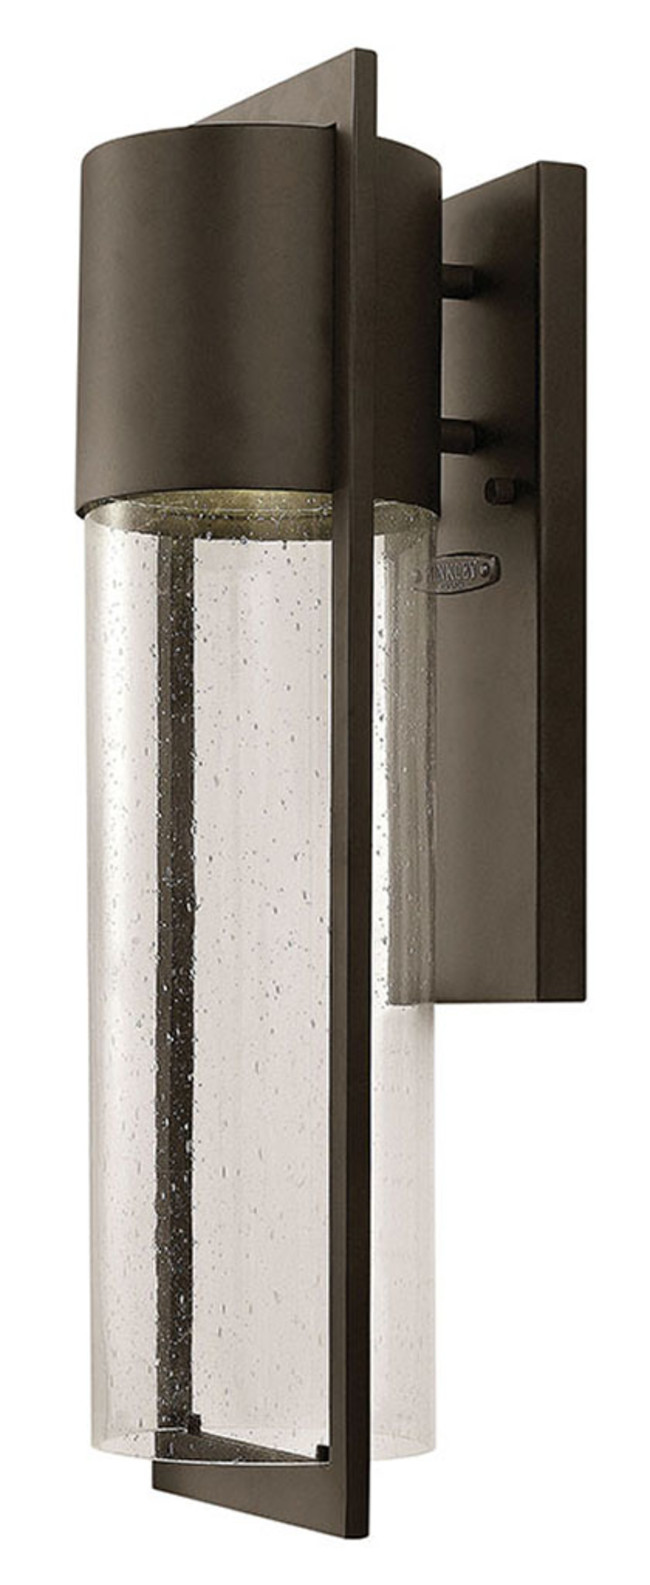 Hinkley Lighting 1324-Led Shelter 20.5" Tall Dark Sky Integrated Led Outdoor Wall Sconce - - image 1 of 7